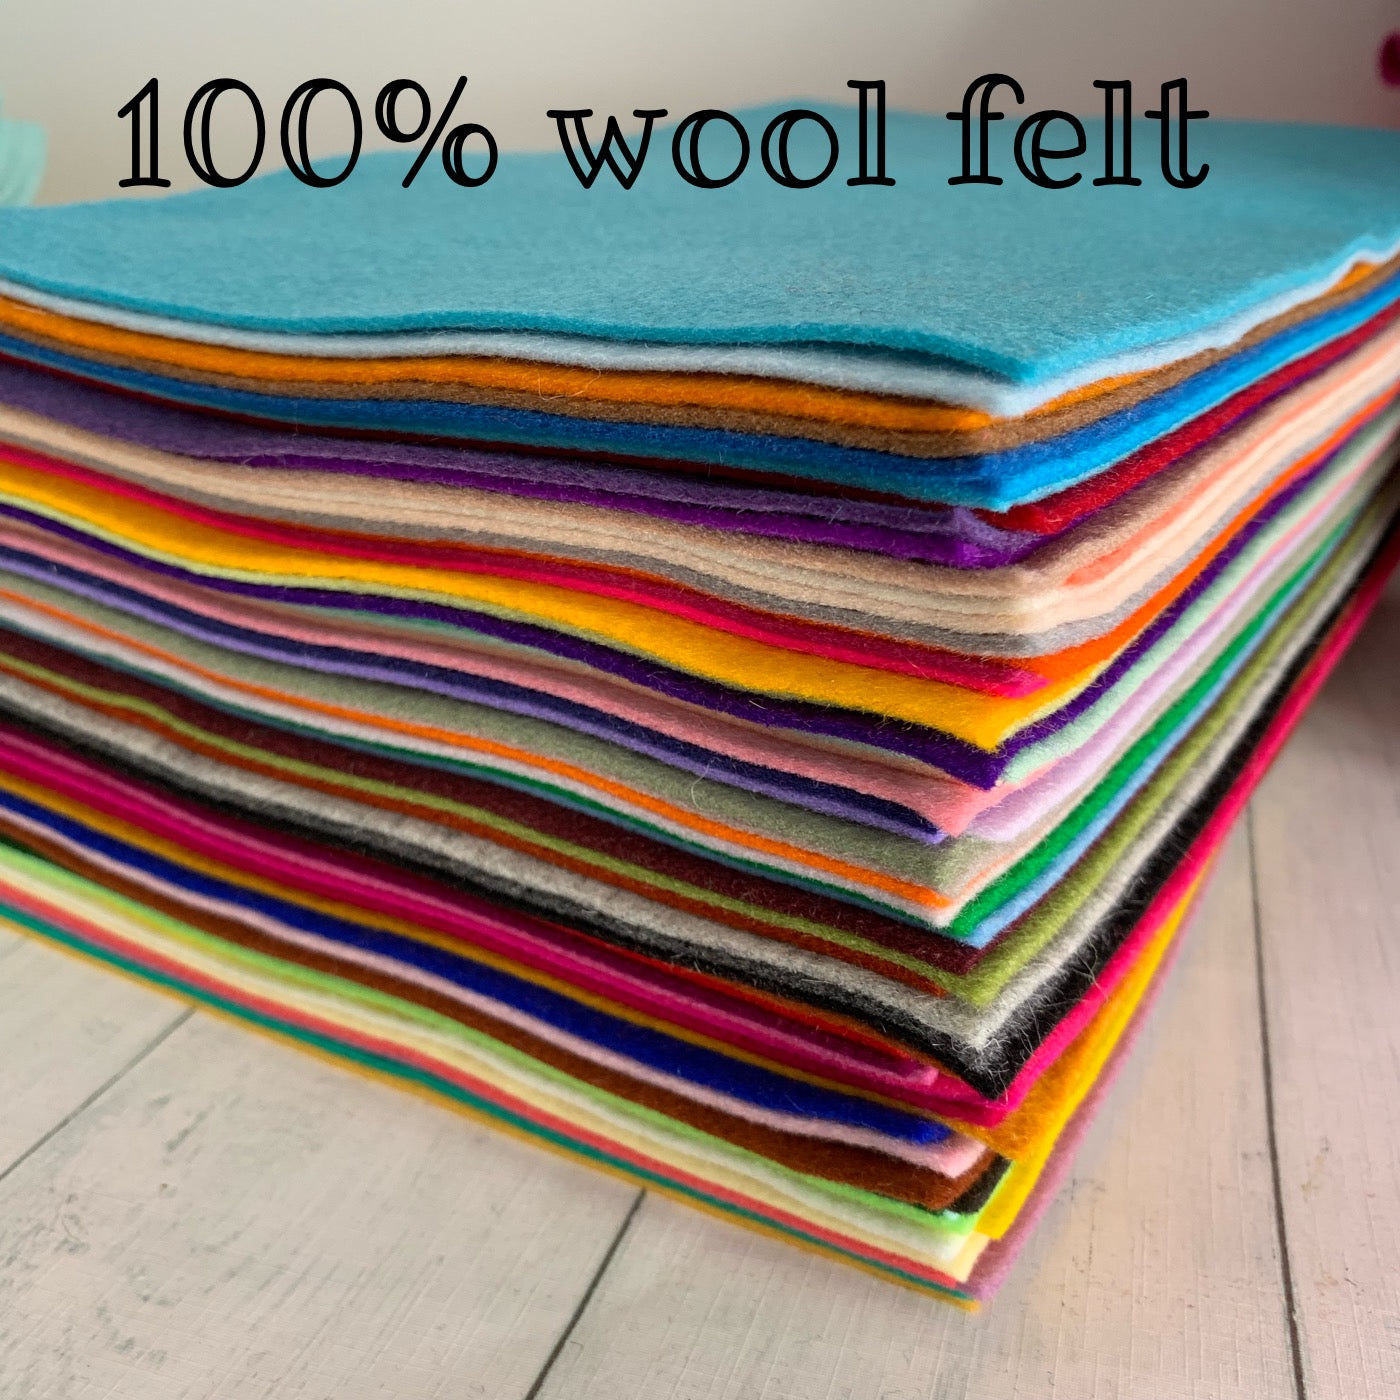 Choose any 10 x sheets of Felt. Pick your own colours